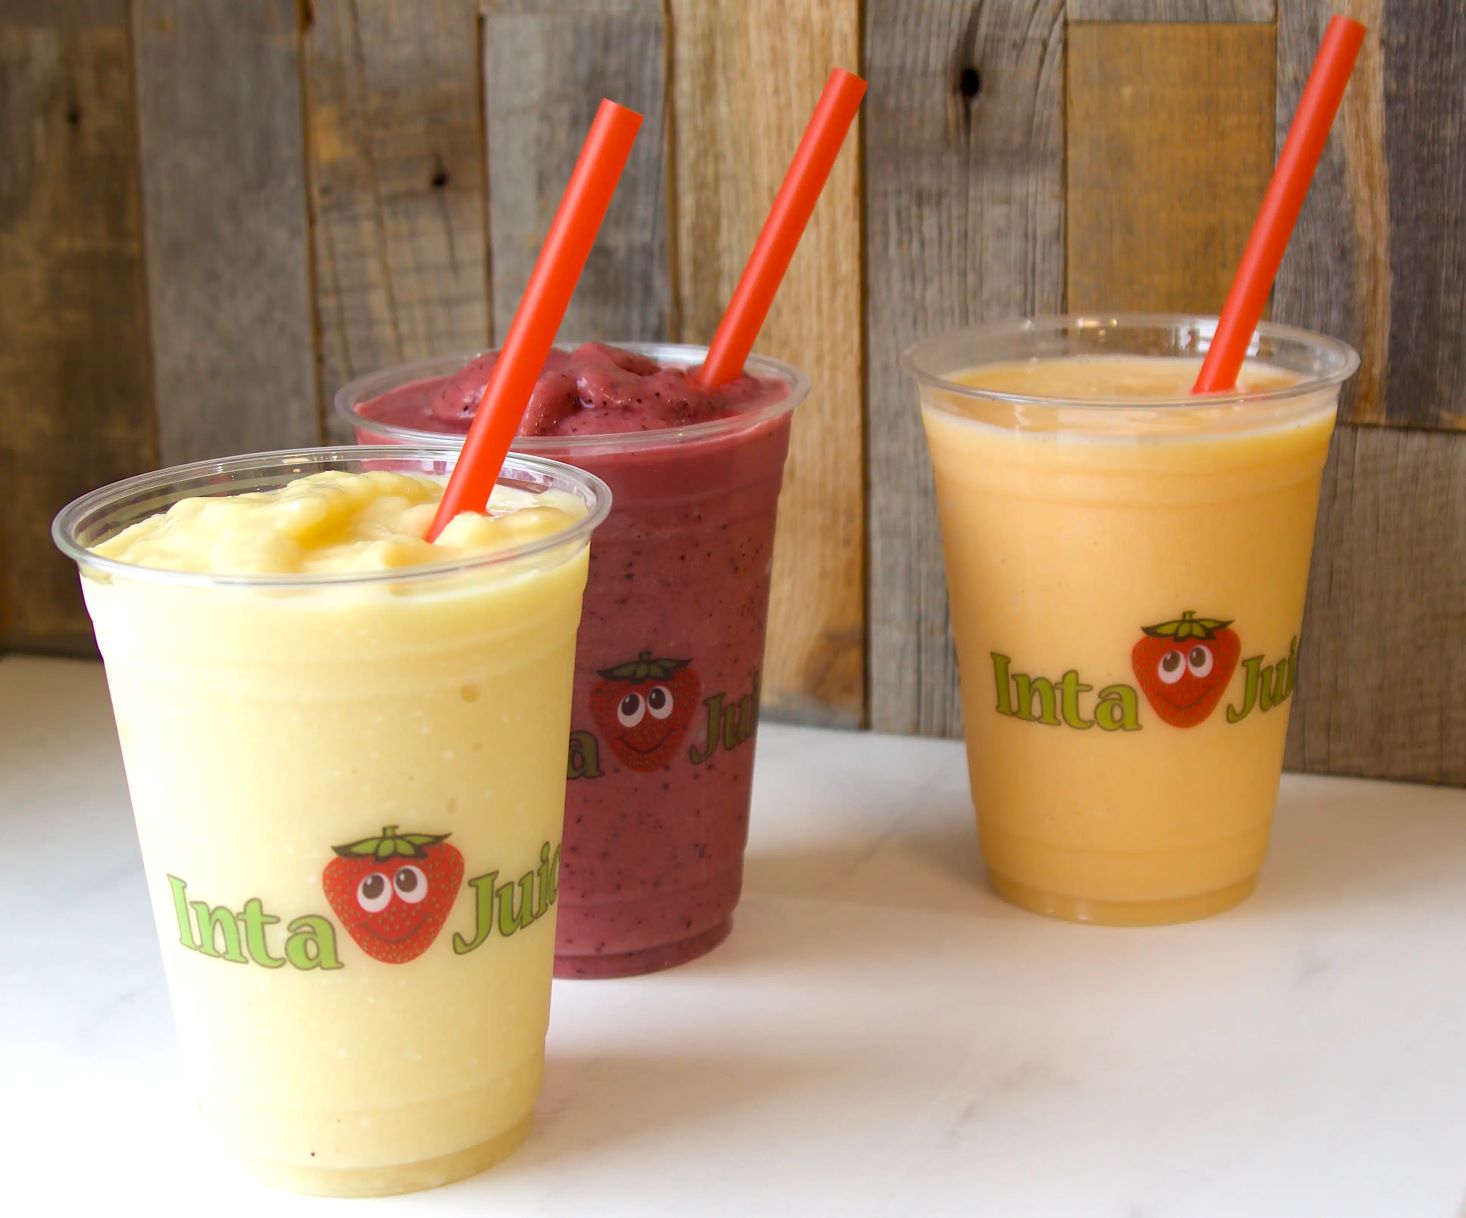 20-inta-juice-nutritional-facts